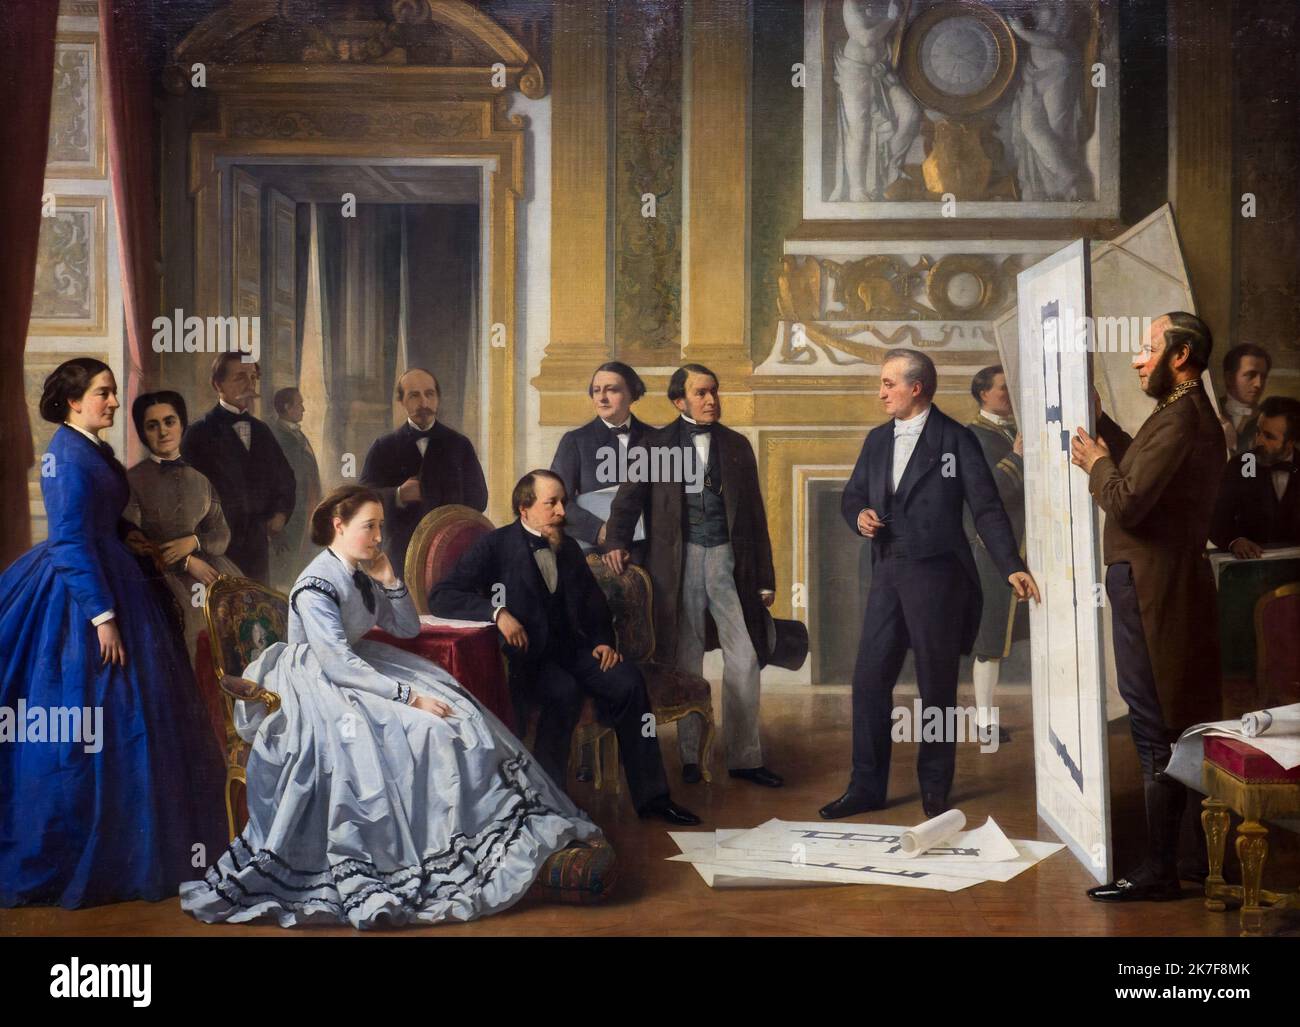 ©Active Museu/MAXPPP - ActiveMuseum 0001919.jpg / Visconti presente a Napoleon III les plans du nouveau Louvre, 1865 - Ange Tissier Peinture a l'huile ; toile 1865 - / Ange Tissier / Peinture Active Museum / Le Pictorium Architect ,Architecture ,Armchair ,Brown ,Castle ,Completion ,Countess ,Couple ,Group ,Hair tied back ,Historical scene ,Horizontal ,Imperial ,Man ,Map ,New () ,Presentation ,Royal costume ,Sitting (to be) ,Woman ,Tuileries Palace ,Castle of Versailles ,Napoleon III ,Visconti ,19th century ,Ange Tissier ,Painting ,  Stock Photo